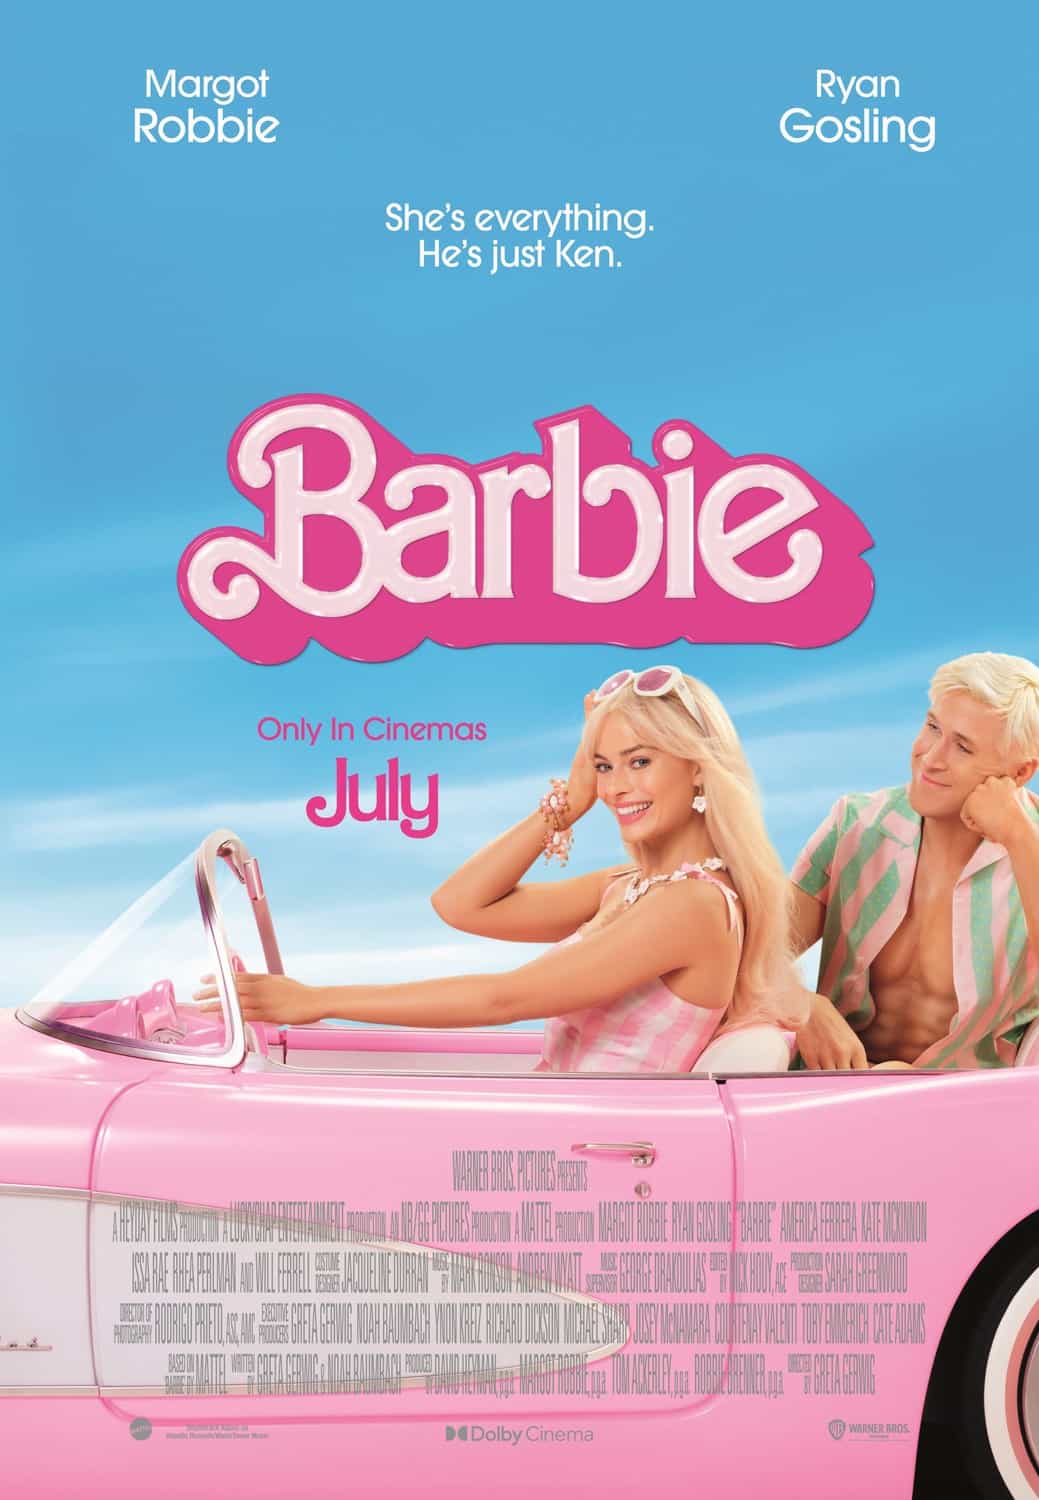 US Box Office Weekend Report 4th - 6th August 2023:  Barbie stays at the top for a third weekend while Meg 2: The Trench is the top new movie at number 2